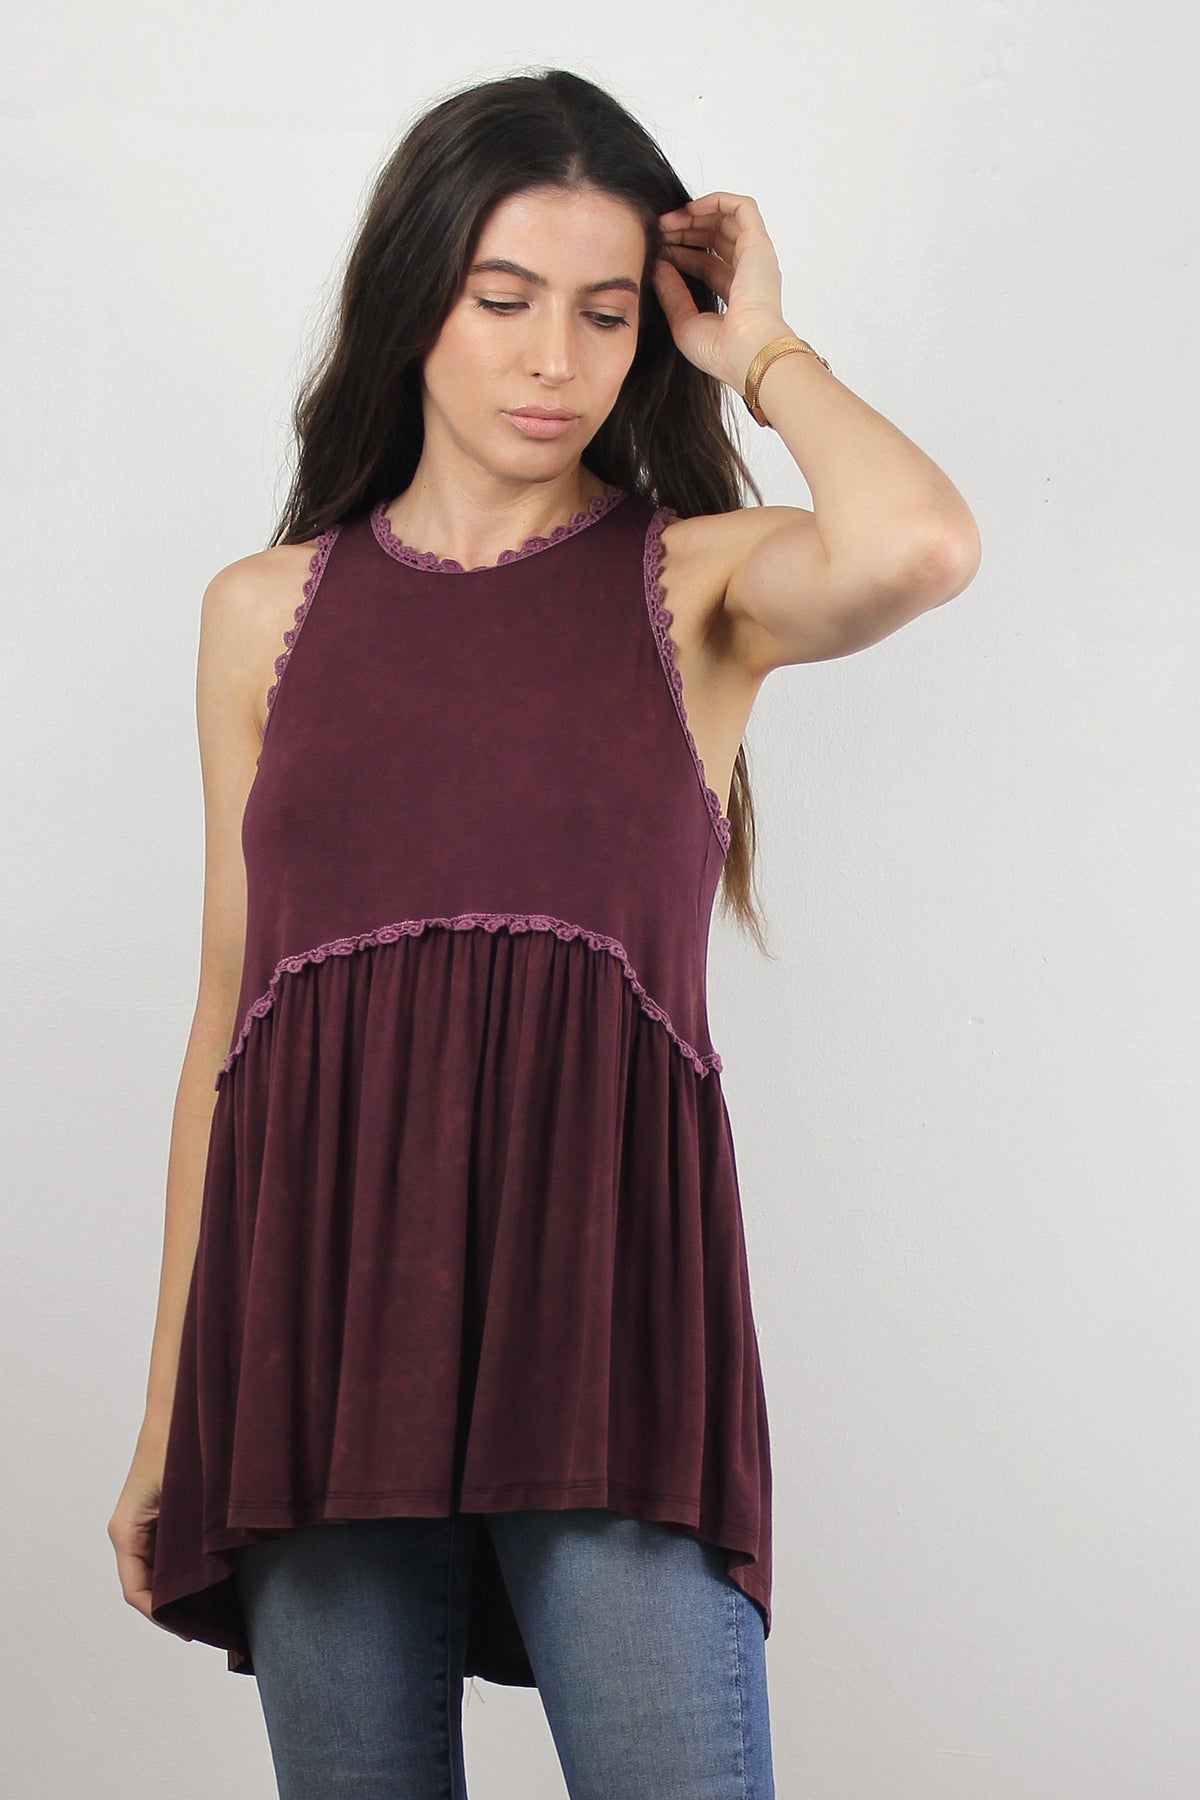 Babydoll style top, with exposed back zipper, in burgundy. Image 4